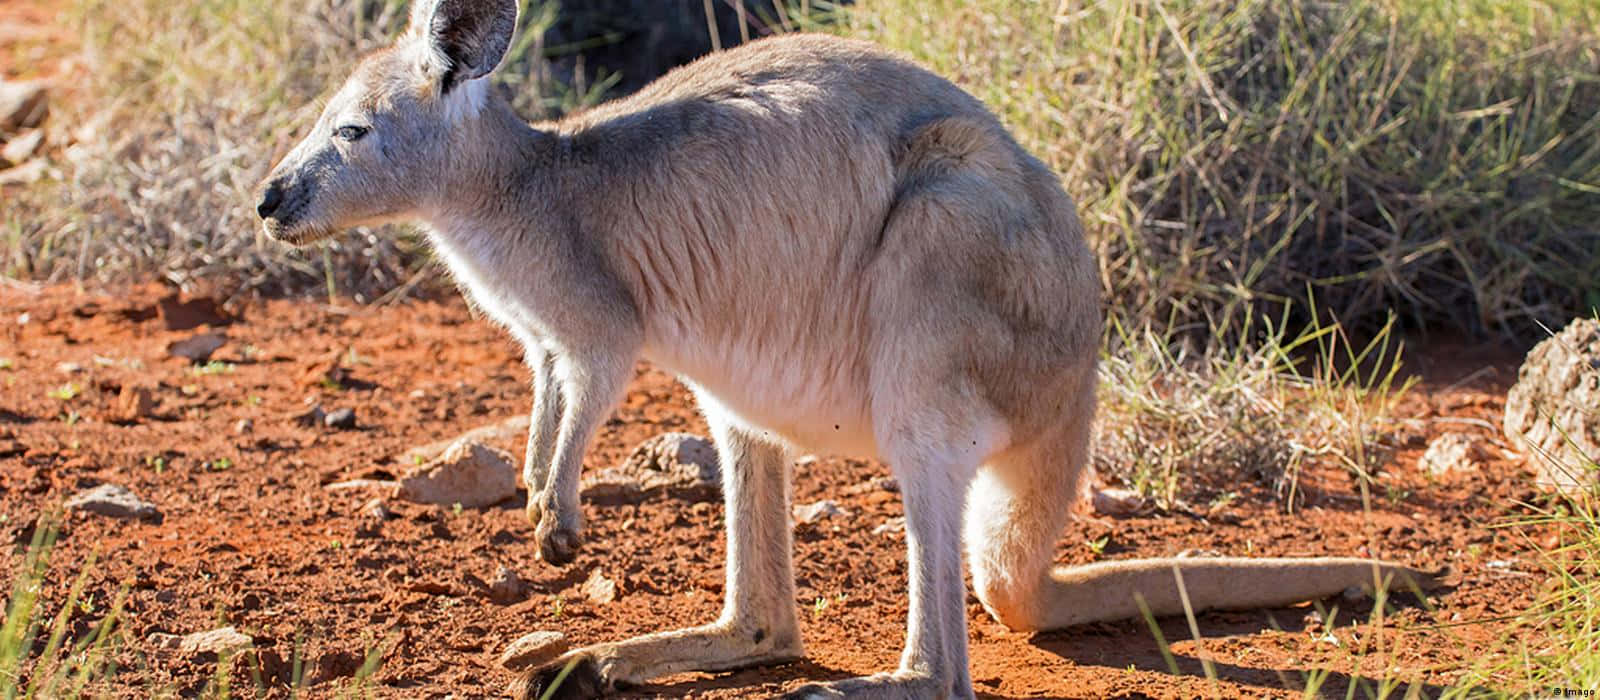 A kangaroo lounges on warm sand in a beautiful setting